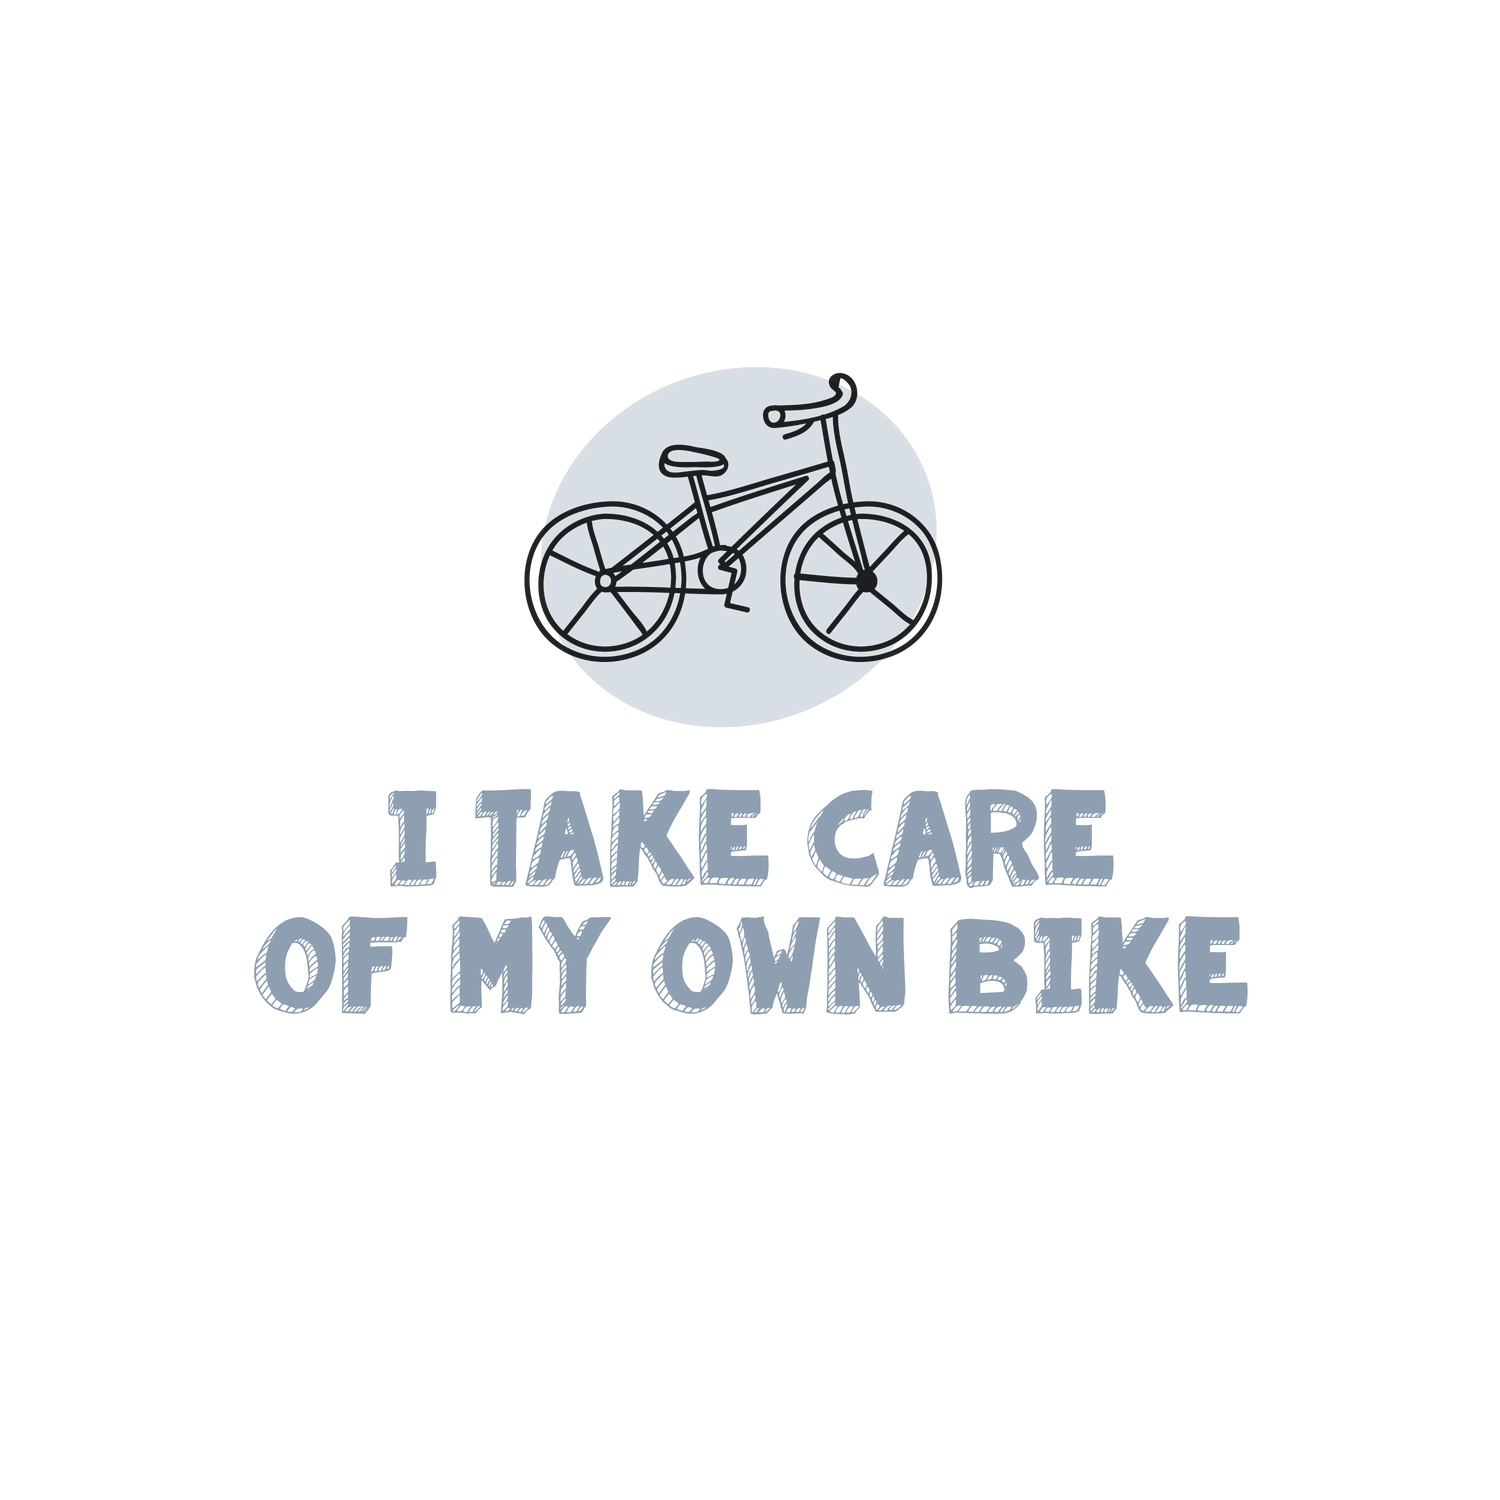 English version of the logo of the I take care of my own bike document to print made by Les Belles Combines